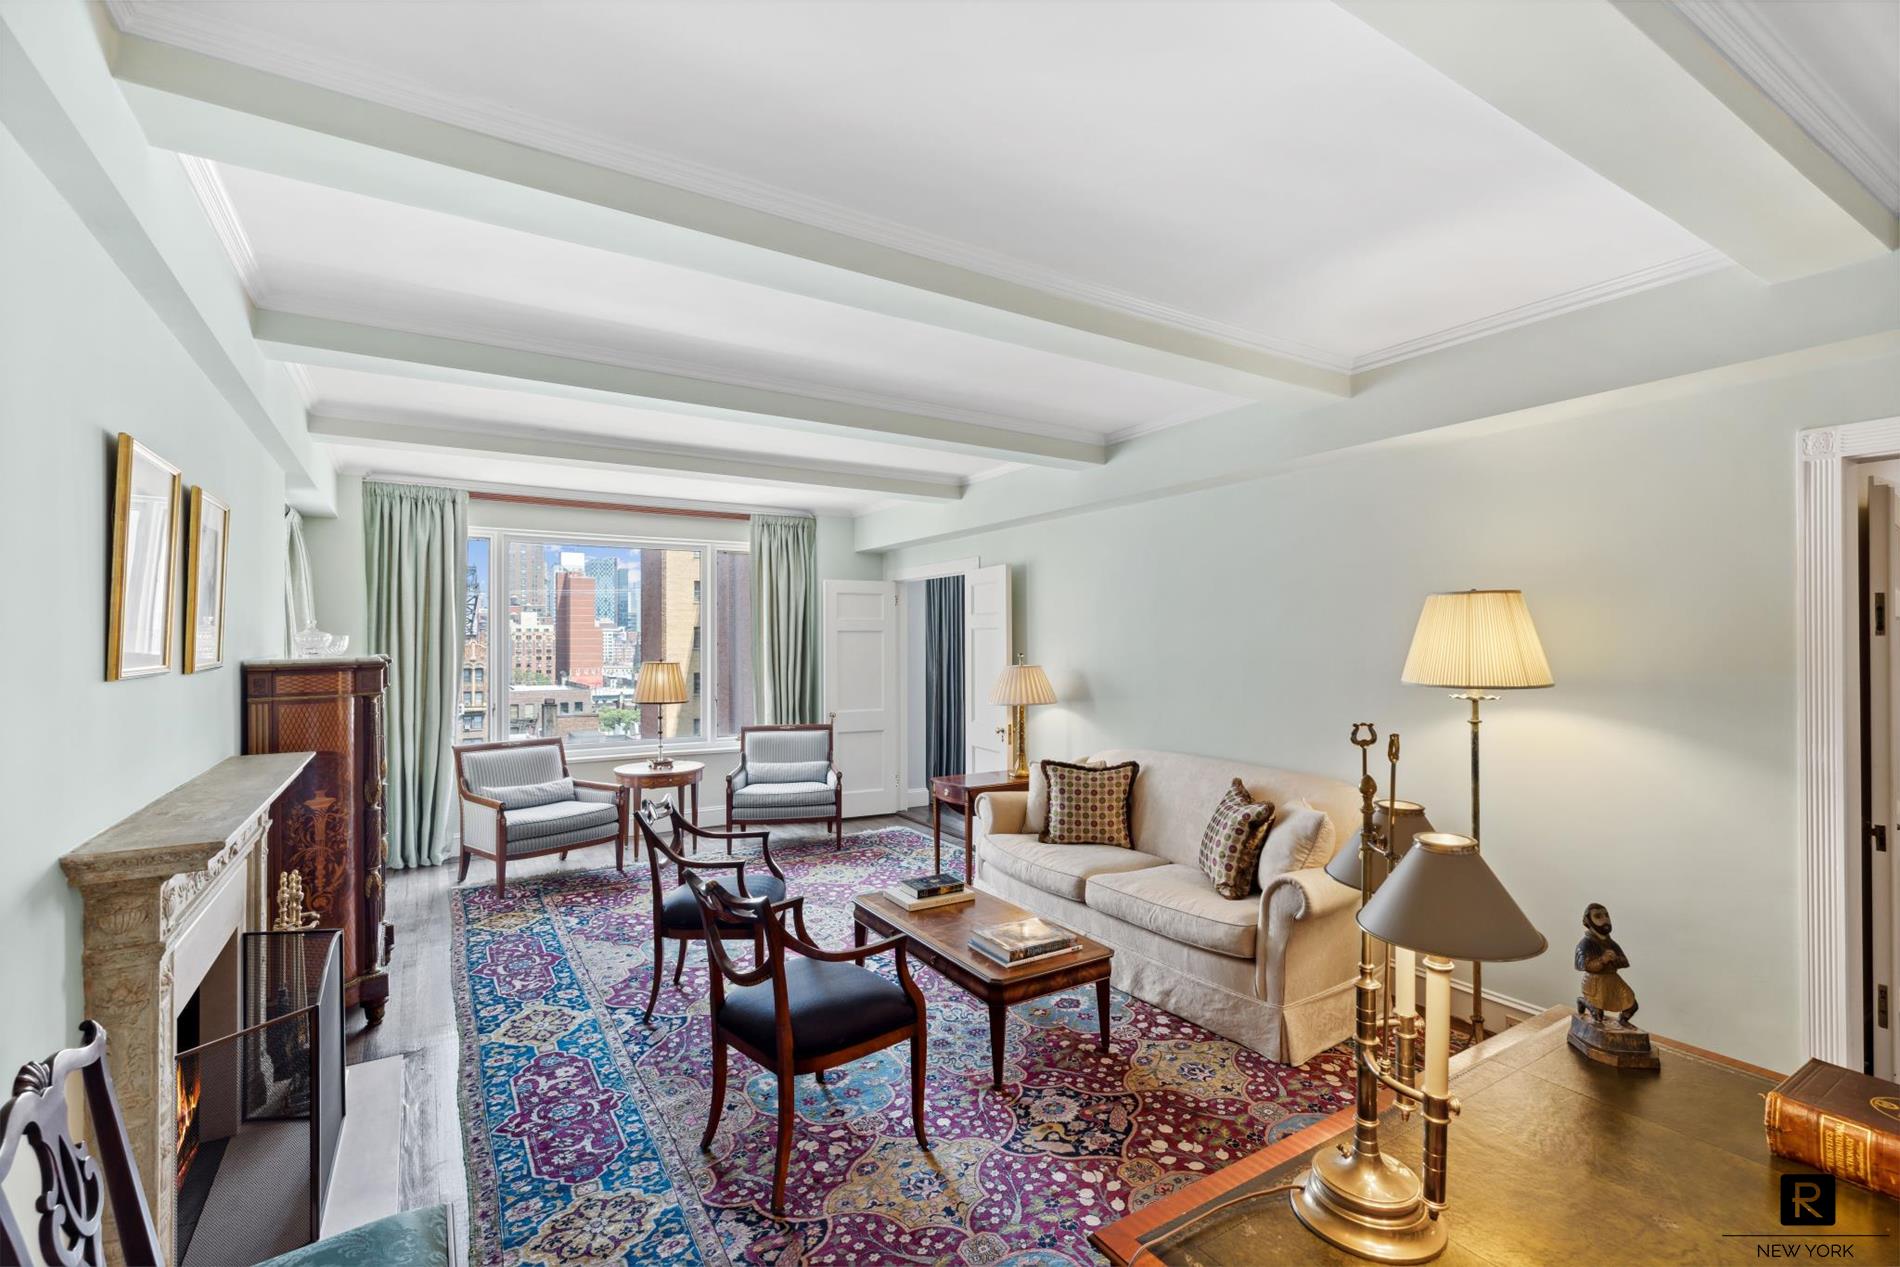 350 East 57th Street 11-B, Sutton Place, Midtown East, NYC - 4 Bedrooms  
3 Bathrooms  
7 Rooms - 